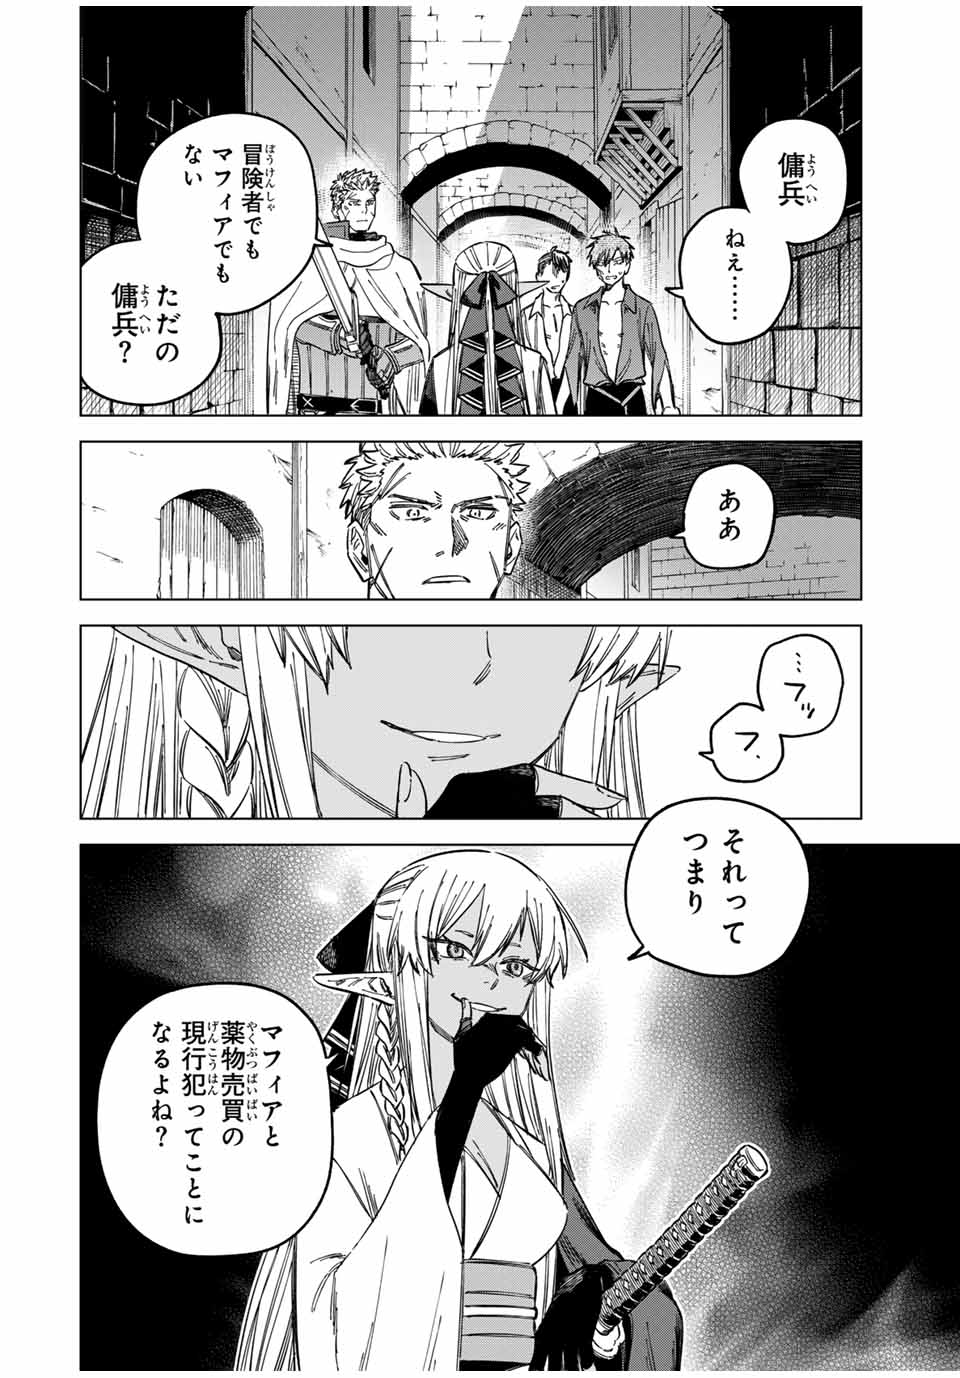 Witch and Mercenary 魔女と傭兵 第11話 - Page 16